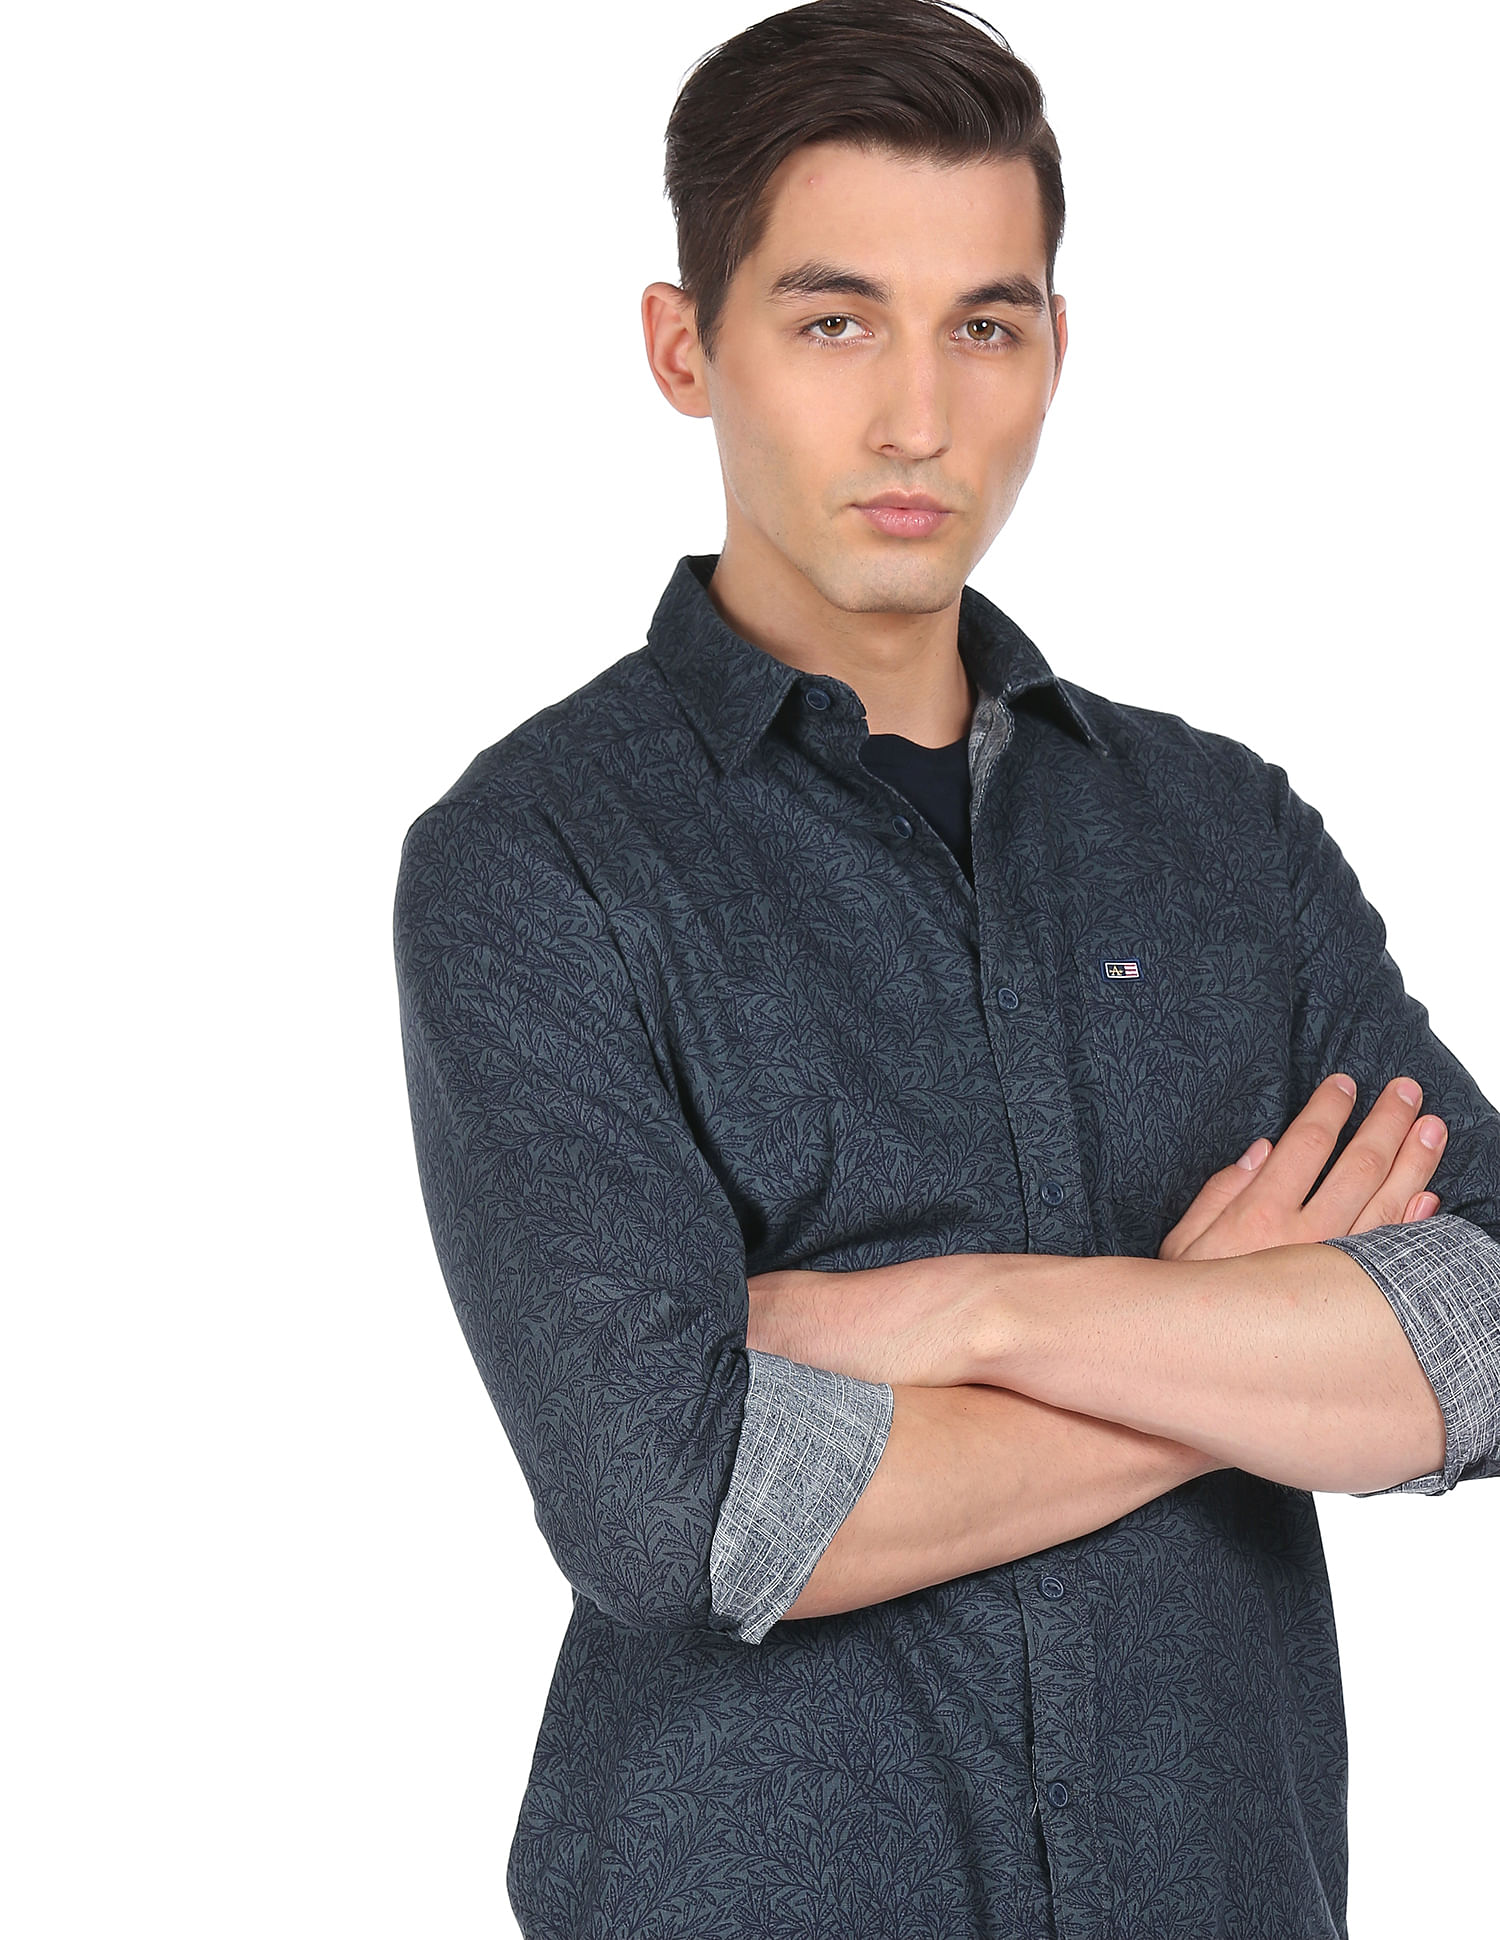 Pepe Jeans Men Solid Casual Black Shirt - Buy BLUE Pepe Jeans Men Solid  Casual Black Shirt Online at Best Prices in India | Flipkart.com